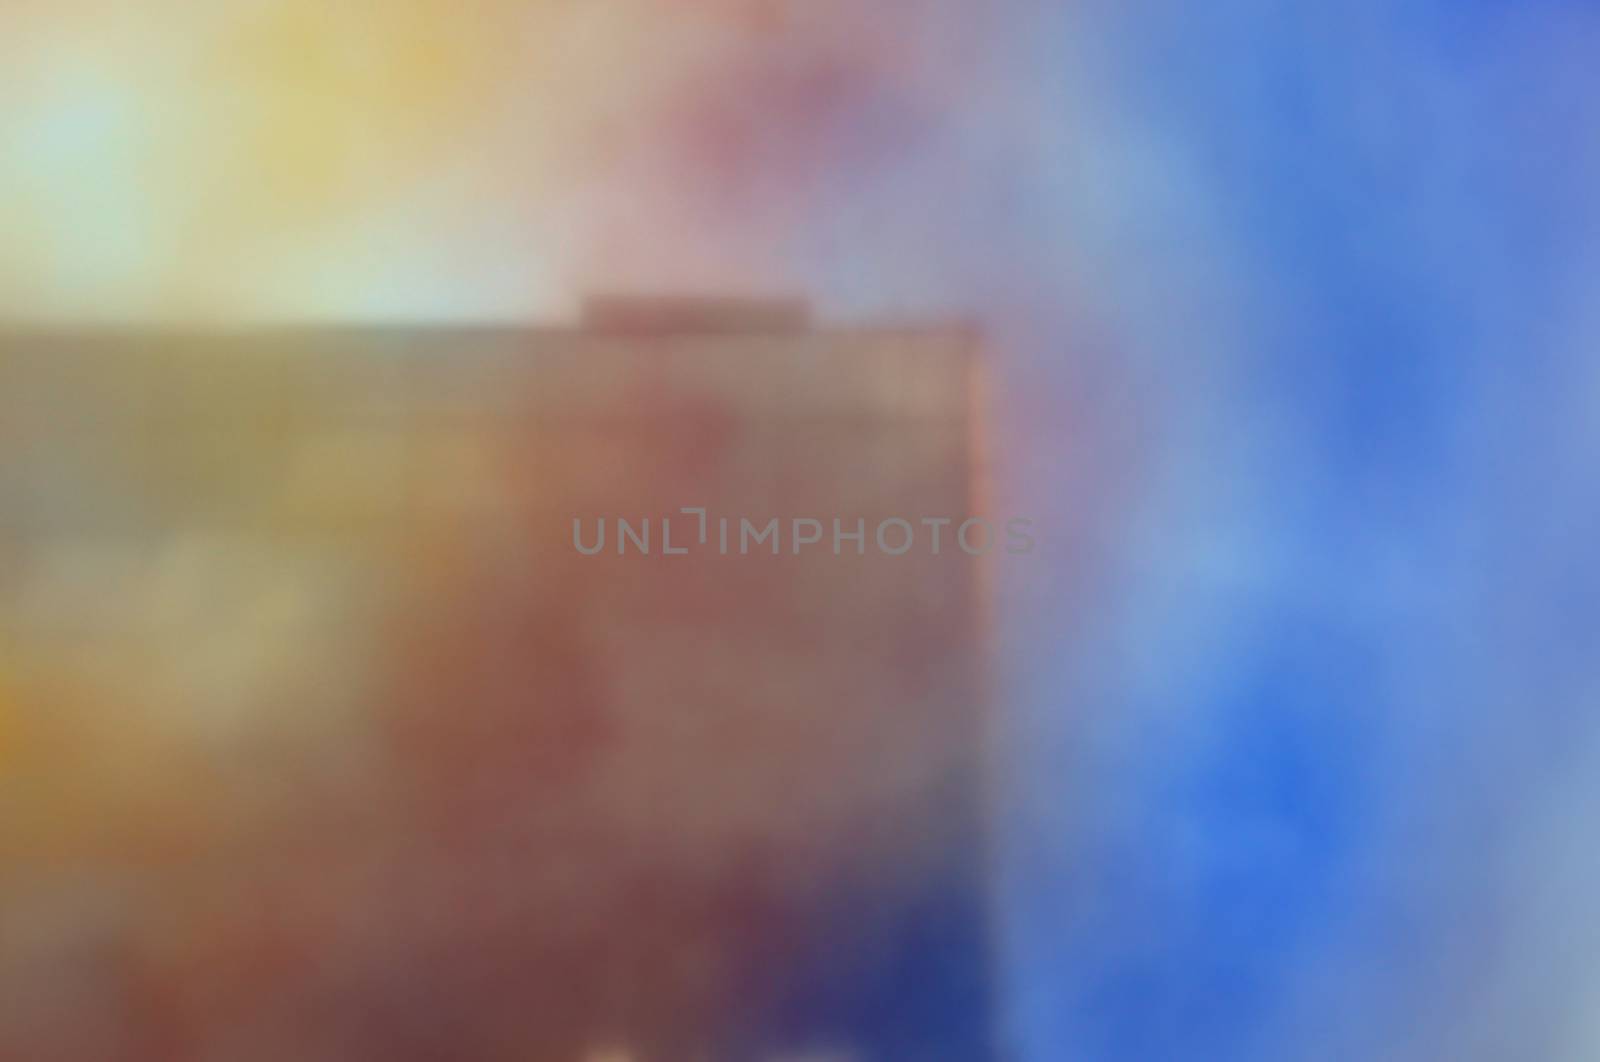 Blurry building exterior through colorful smudged glass. Architecture abstract.